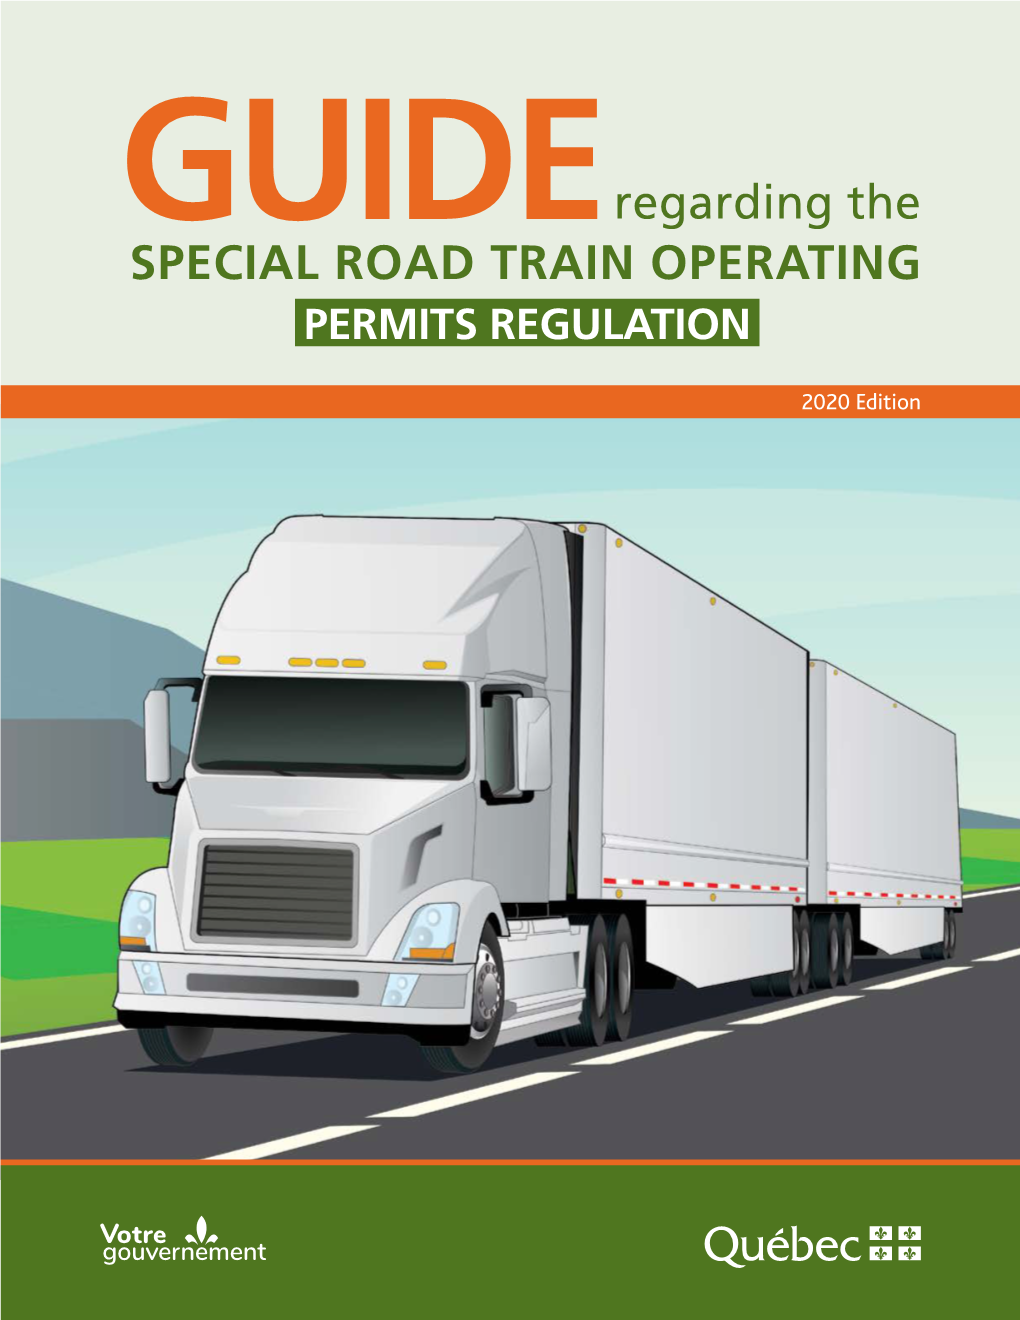 GUIDE Regarding the SPECIAL ROAD TRAIN OPERATING PERMITS REGULATION